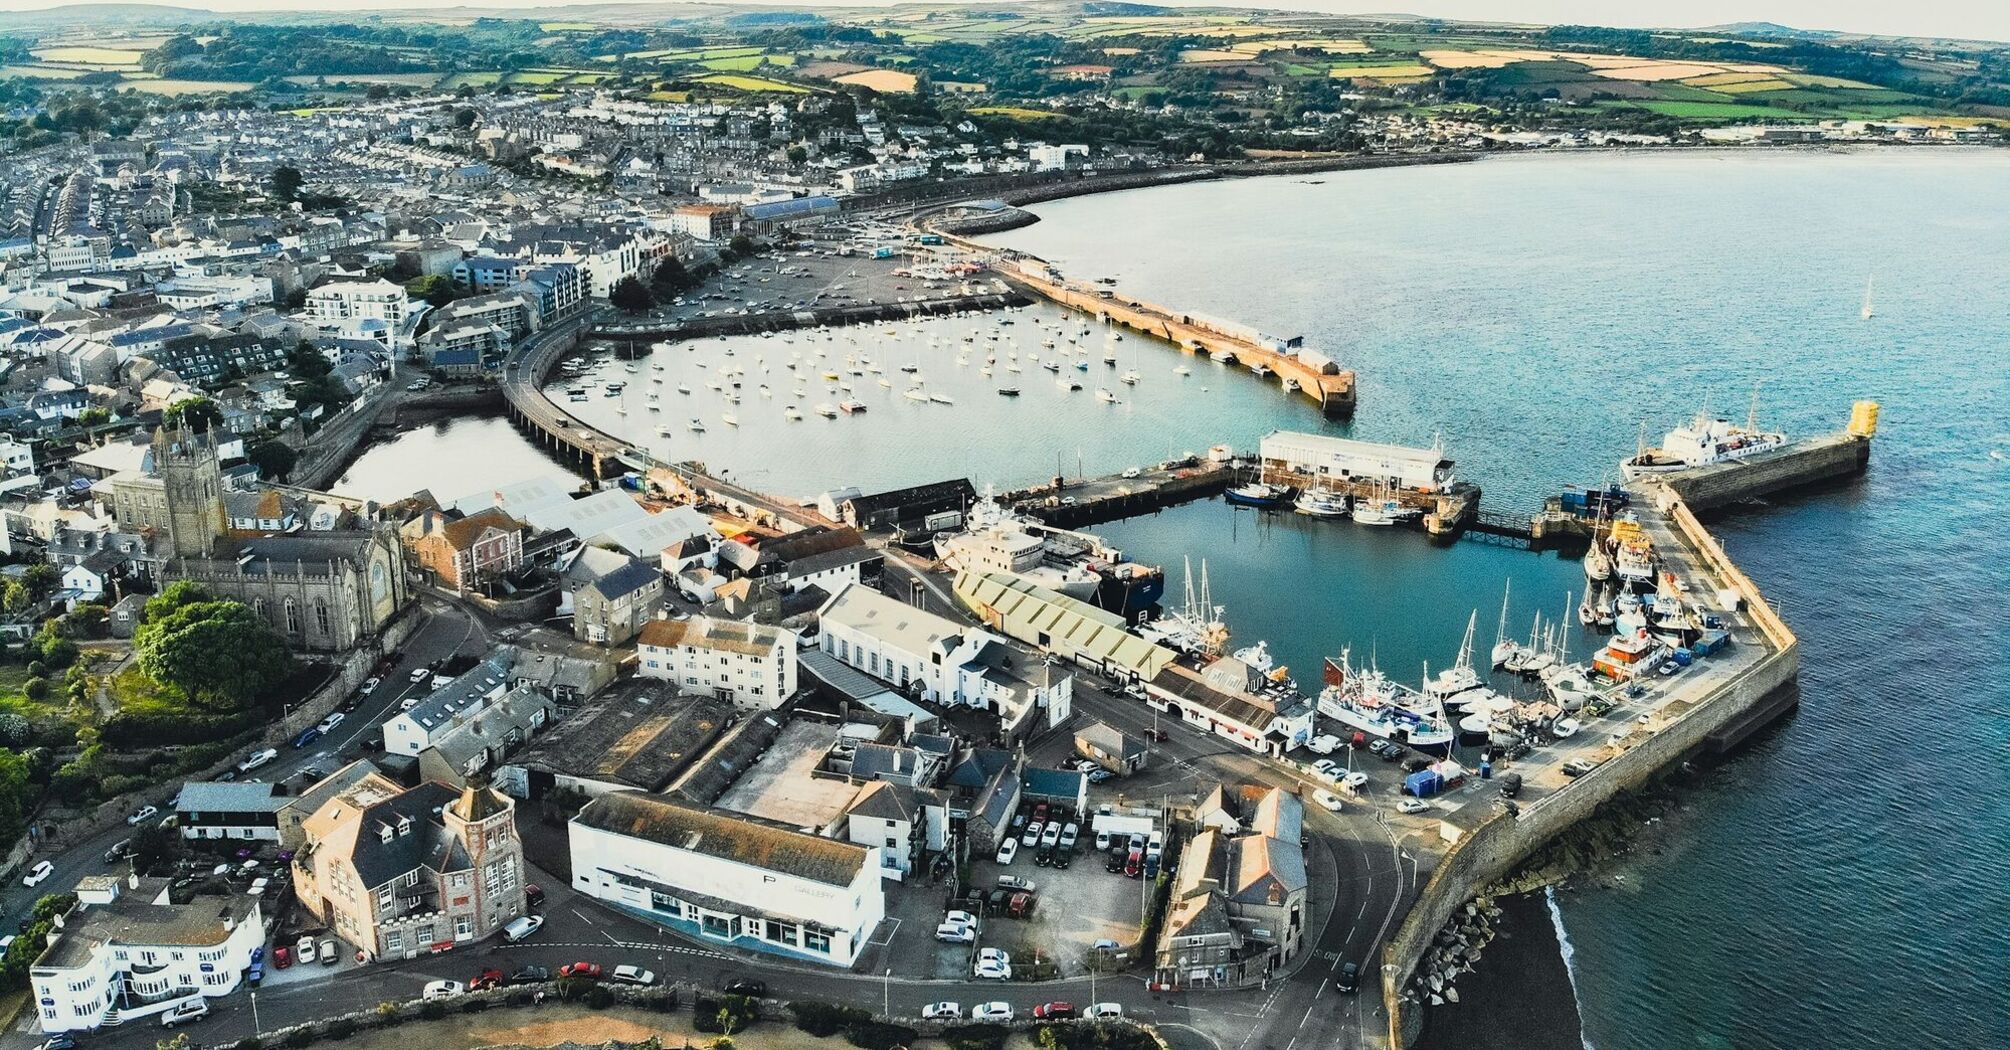 Aerial view of Penzance harbor and town, showcasing boats docked and surrounding buildings